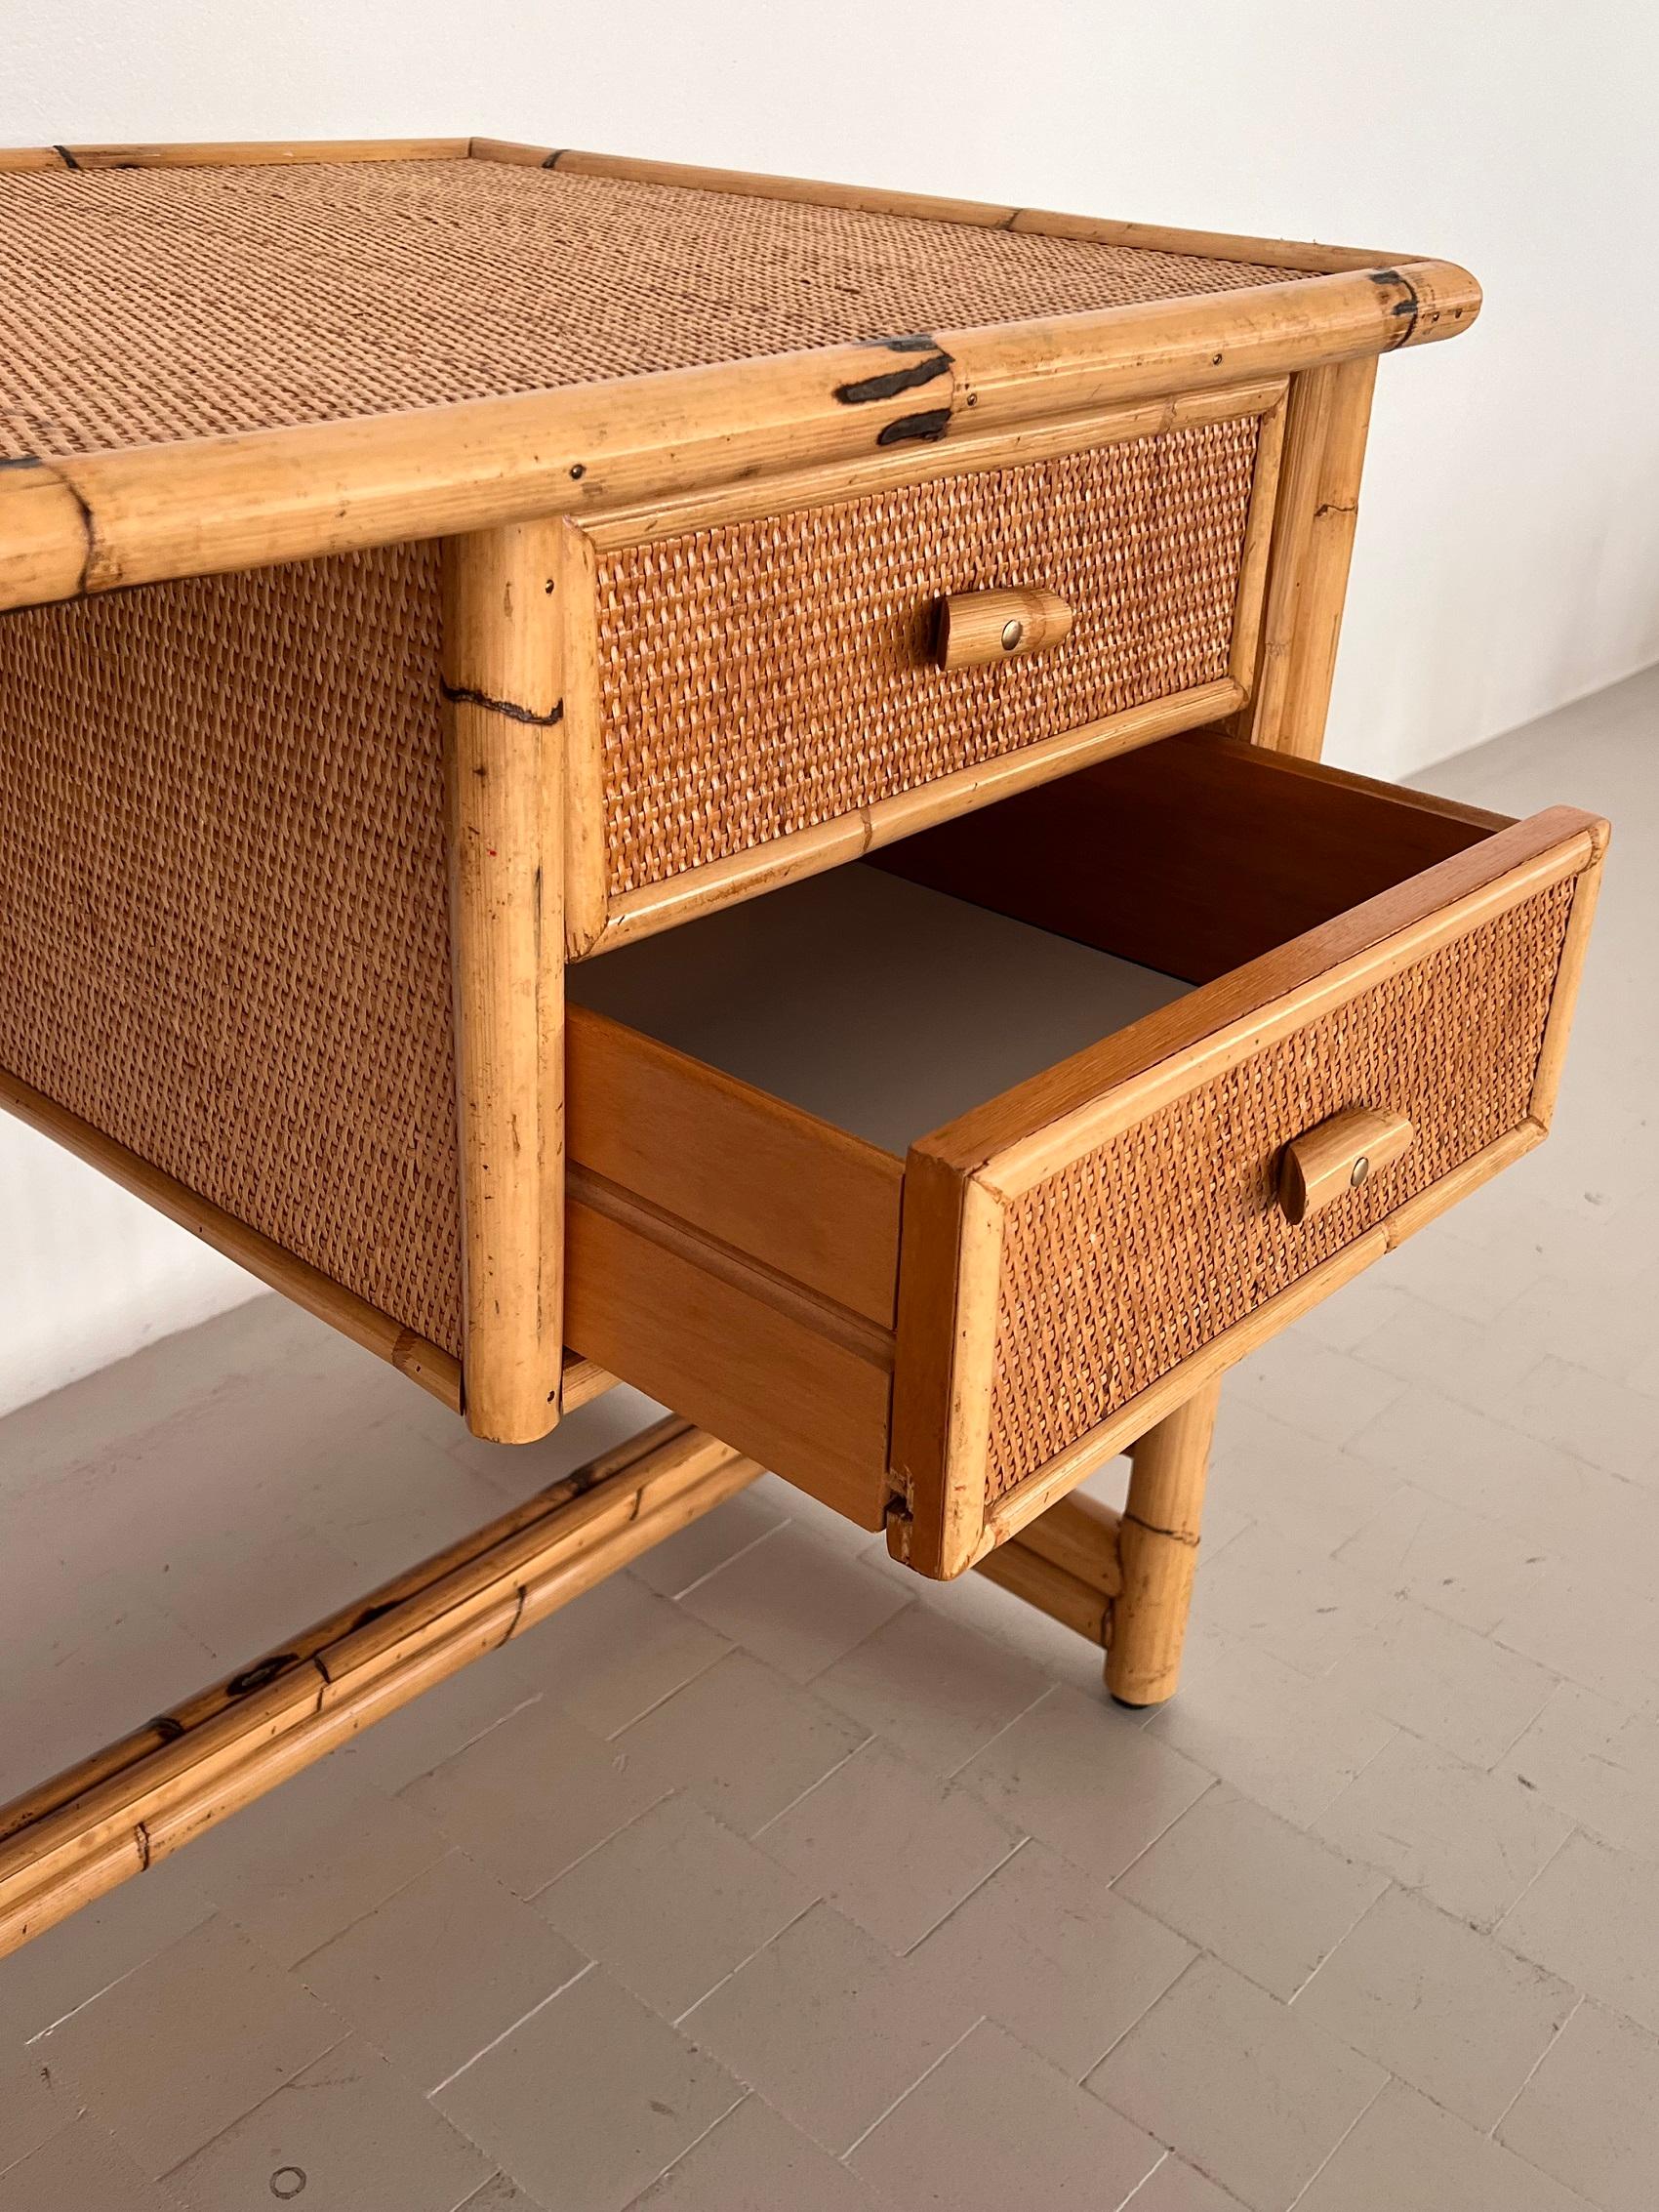 Italian Midcentury Bamboo and Rattan Desk or Vanity with two Drawers, 1970s For Sale 5